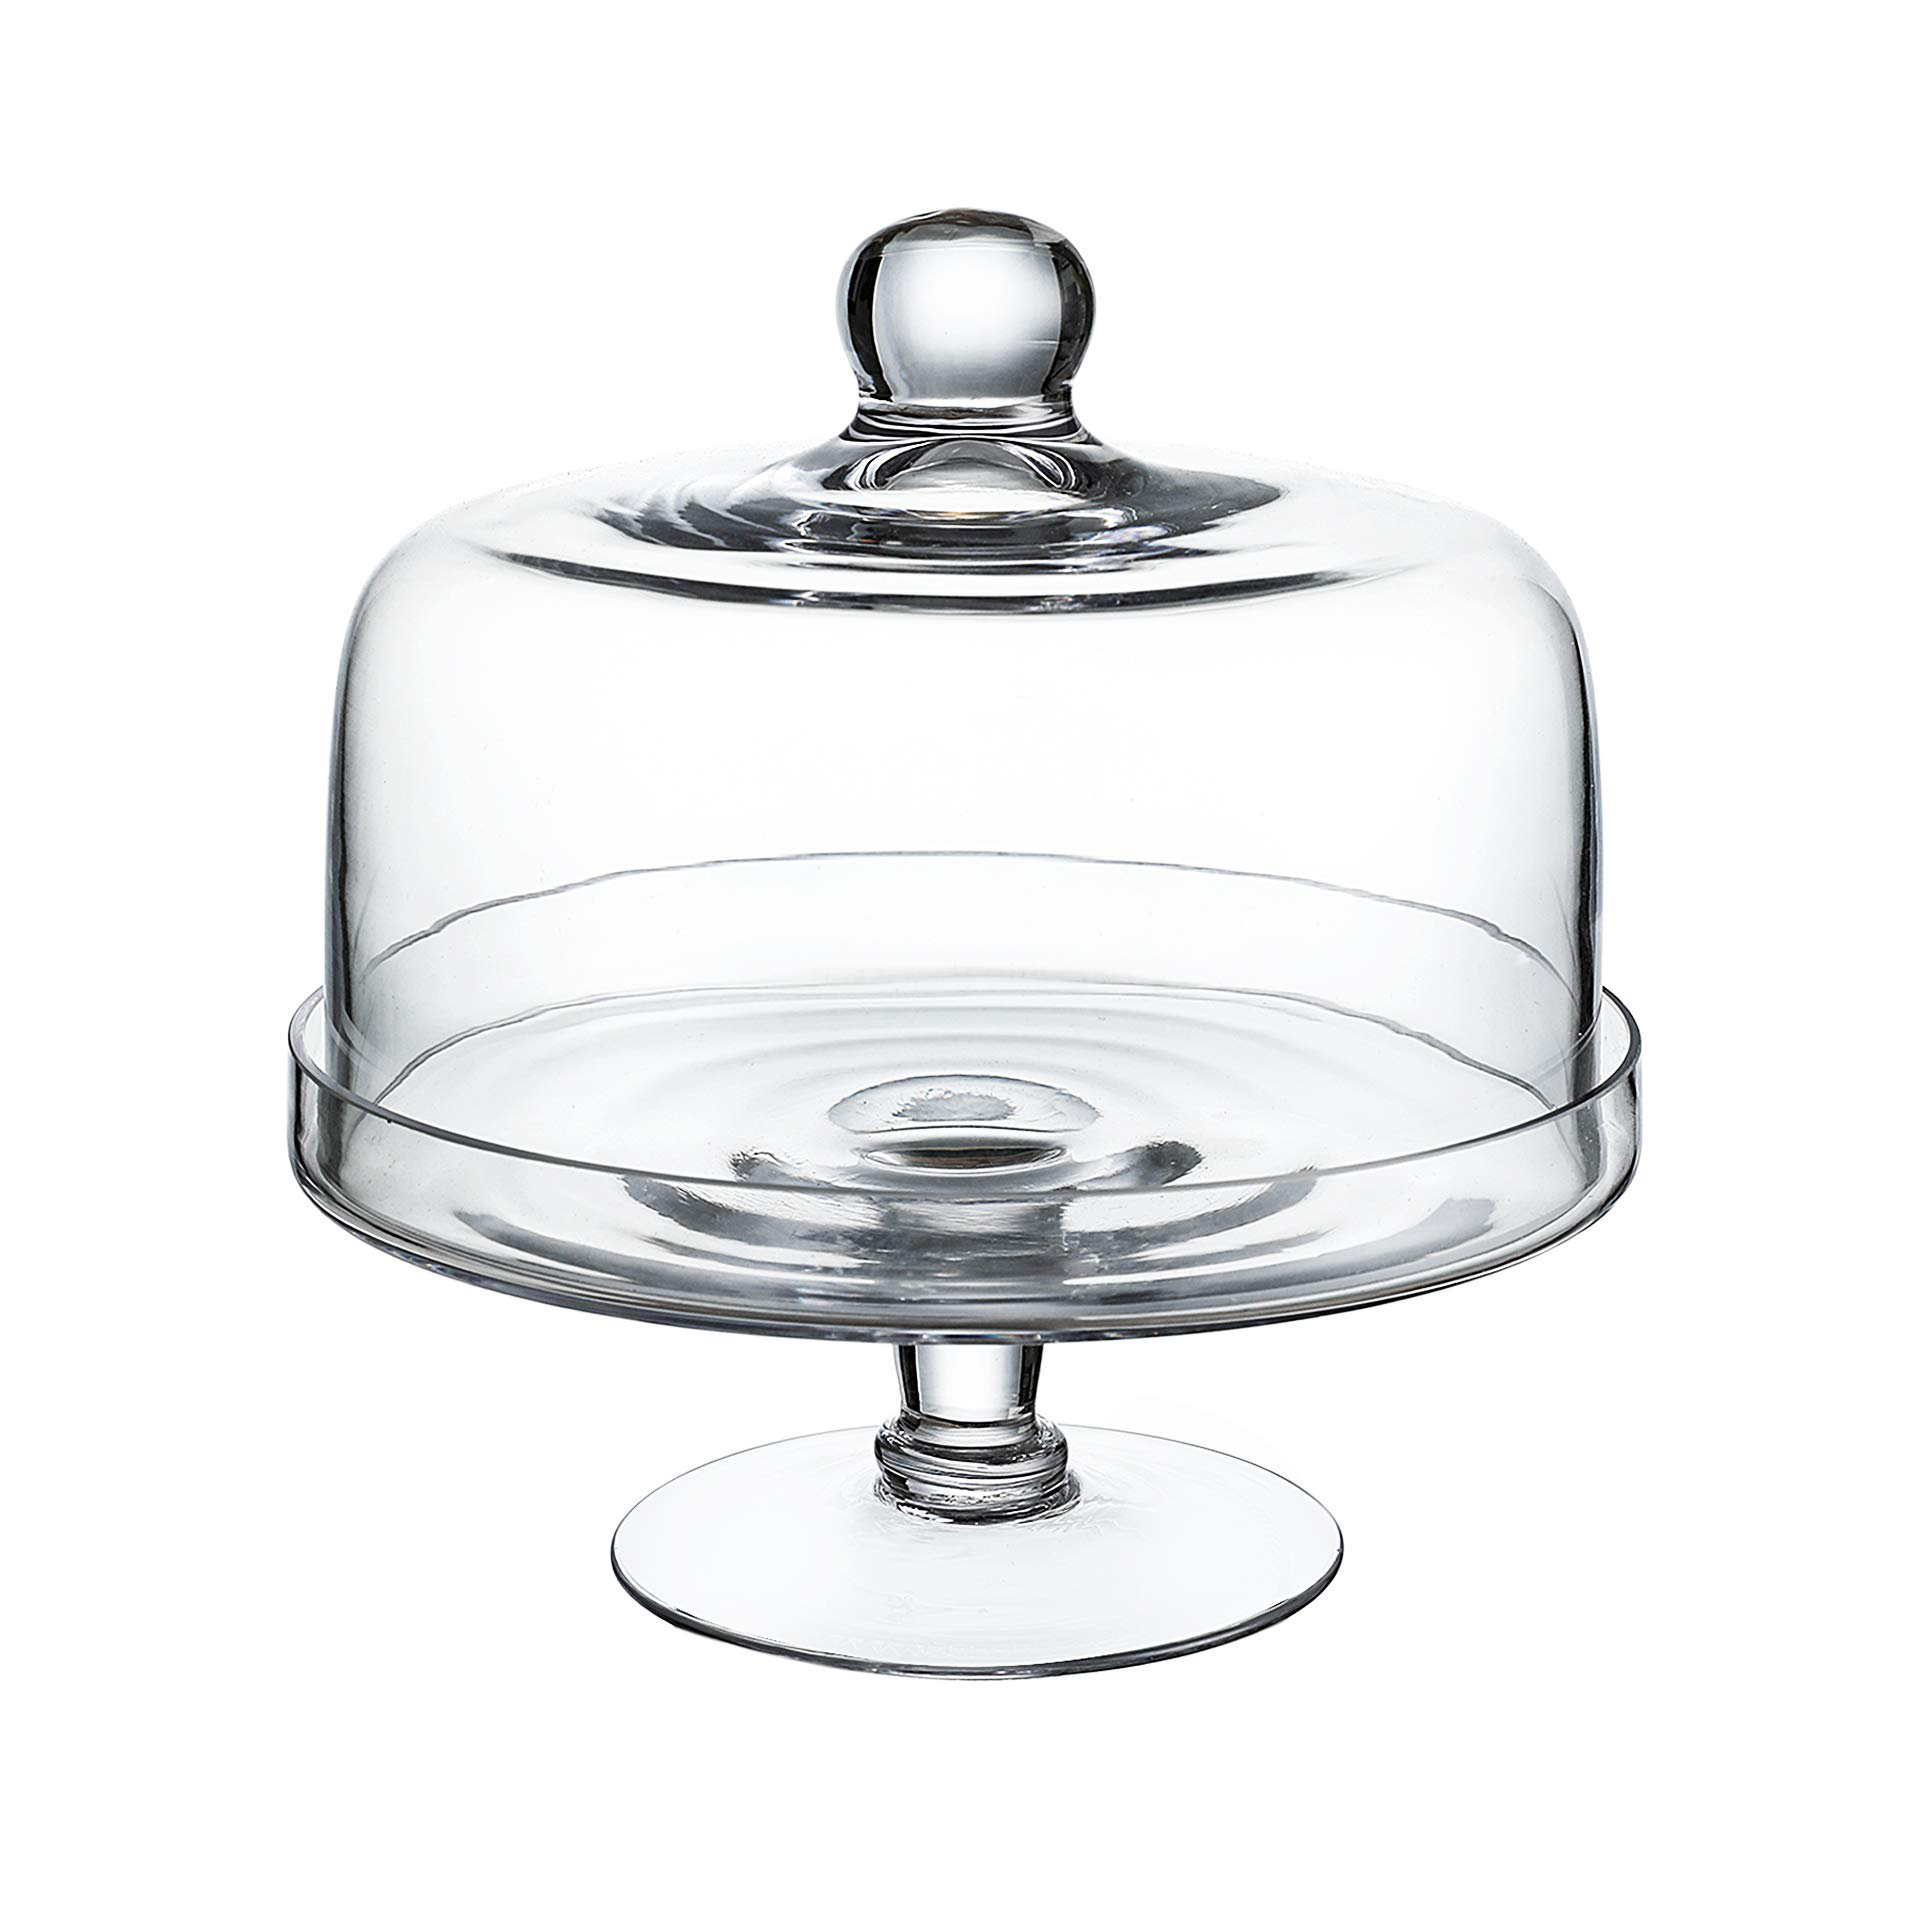 Buy Cake Stands from top Brands at Best Prices Online in India | Tata CLiQ